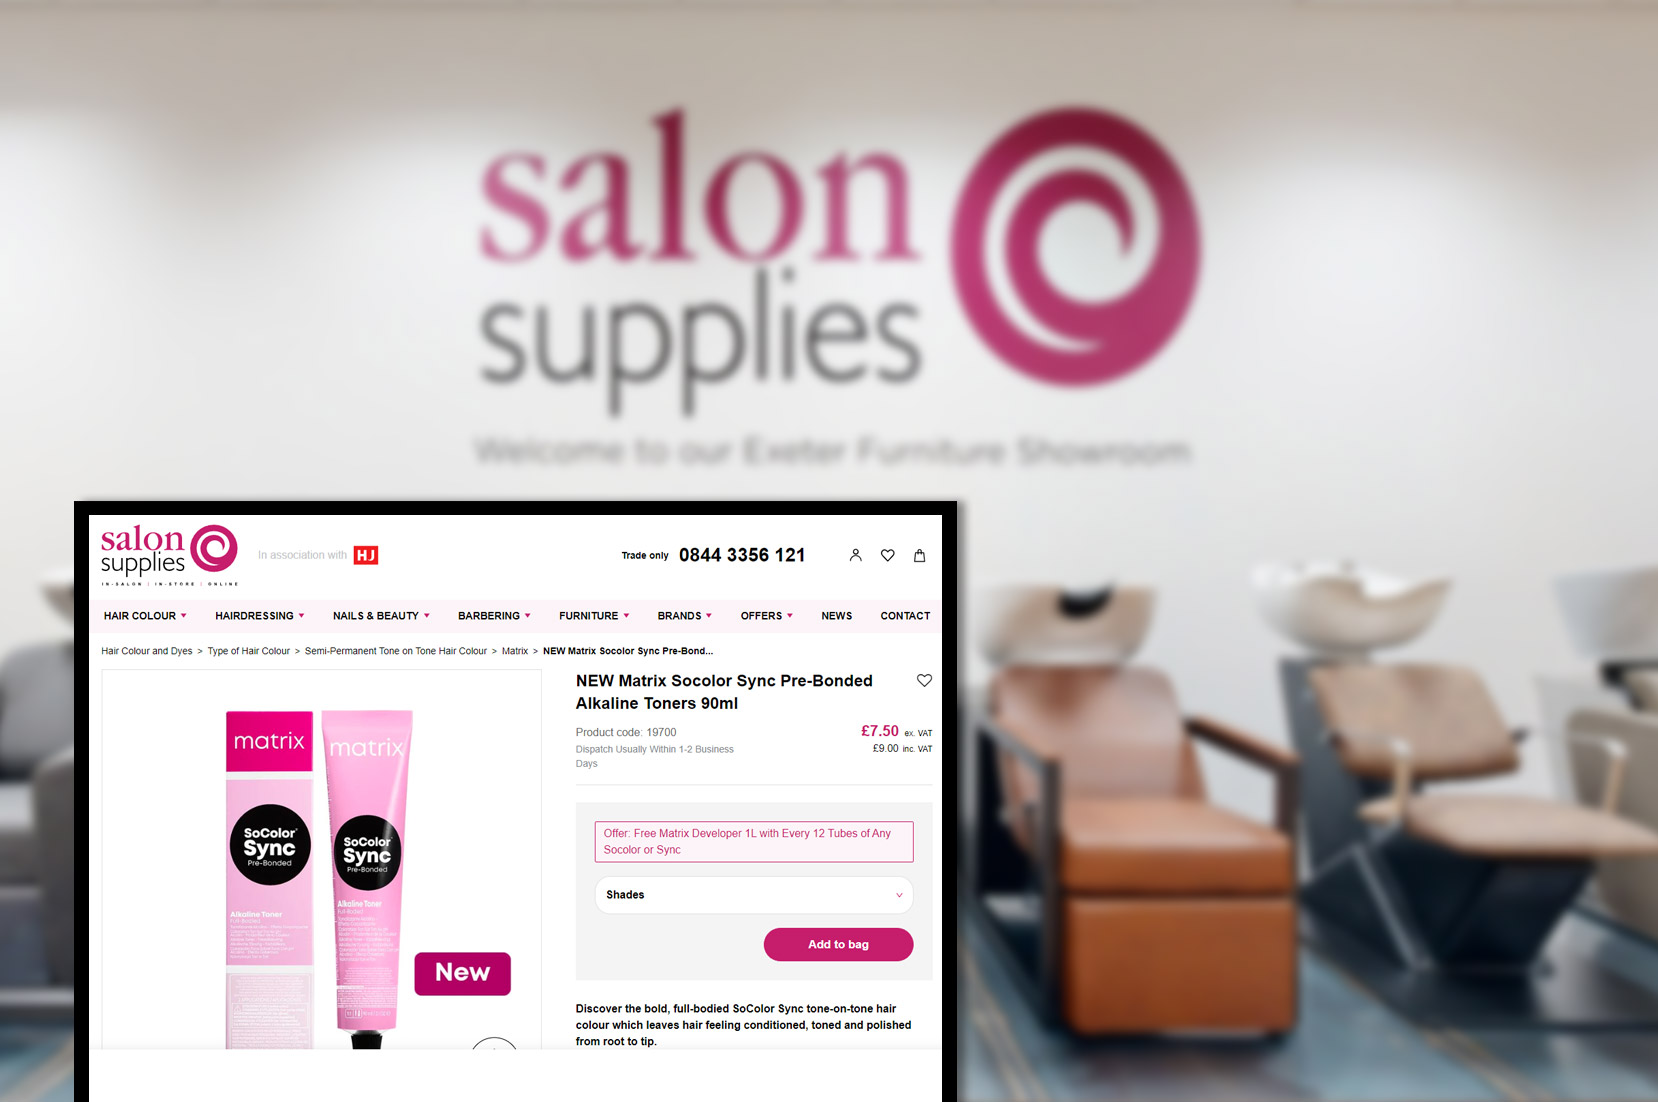 salonsupplies-co-ukproduct-pricing-information-and-image-scraping-services